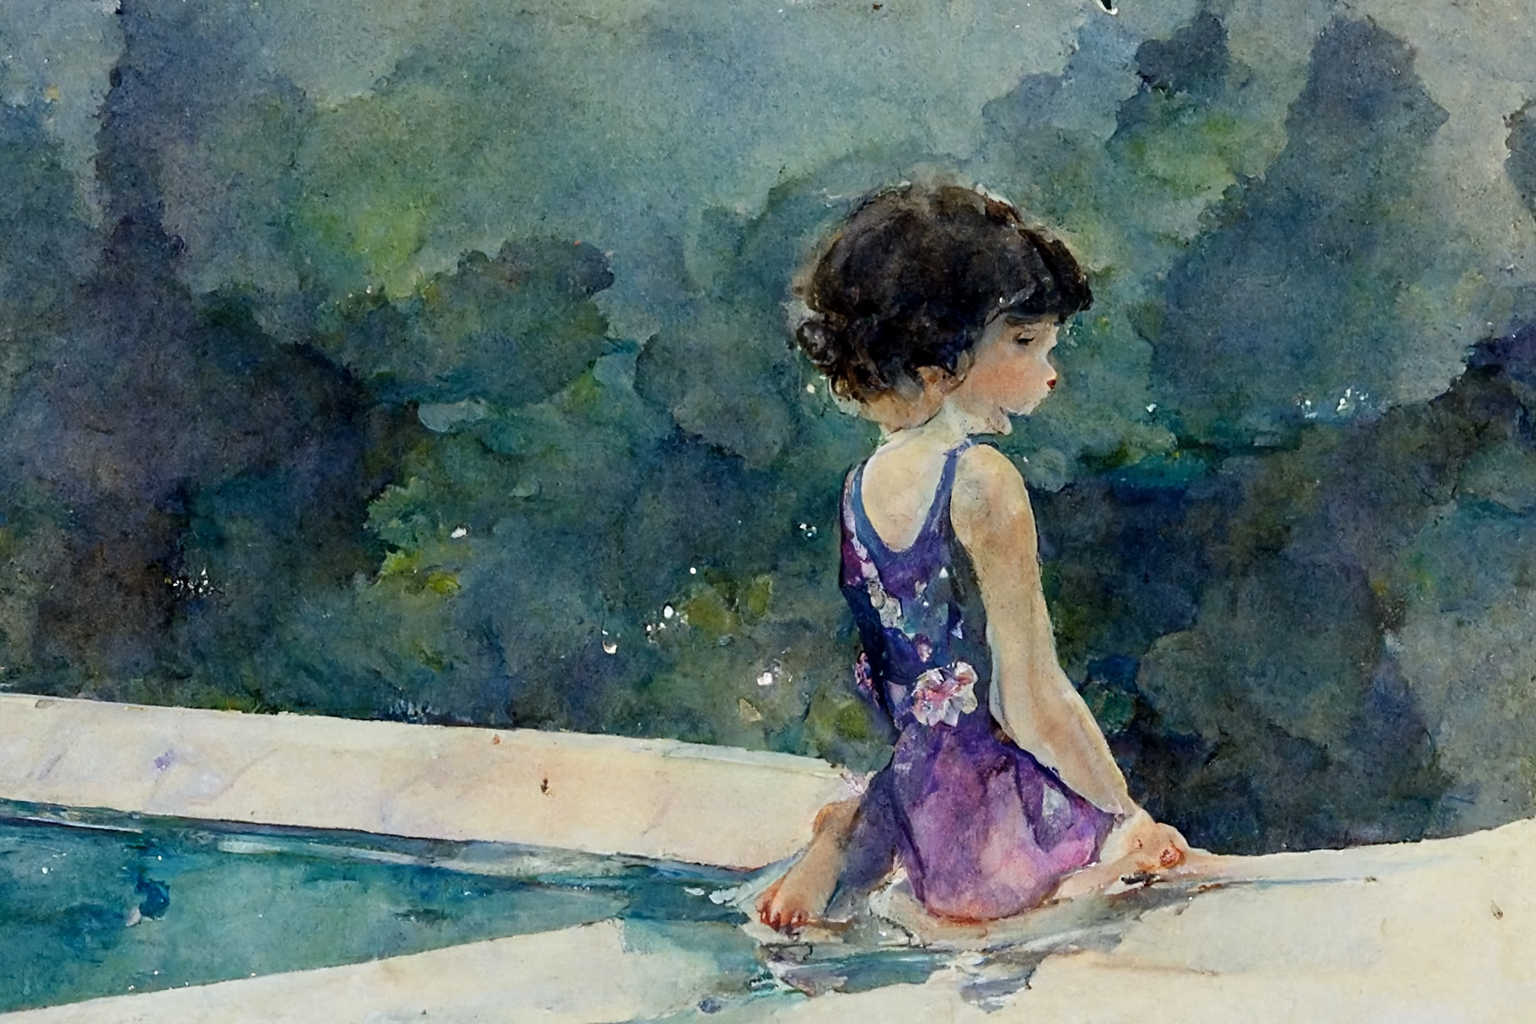 A little girl with short dark hair sits on the edge of a pool, watercolor